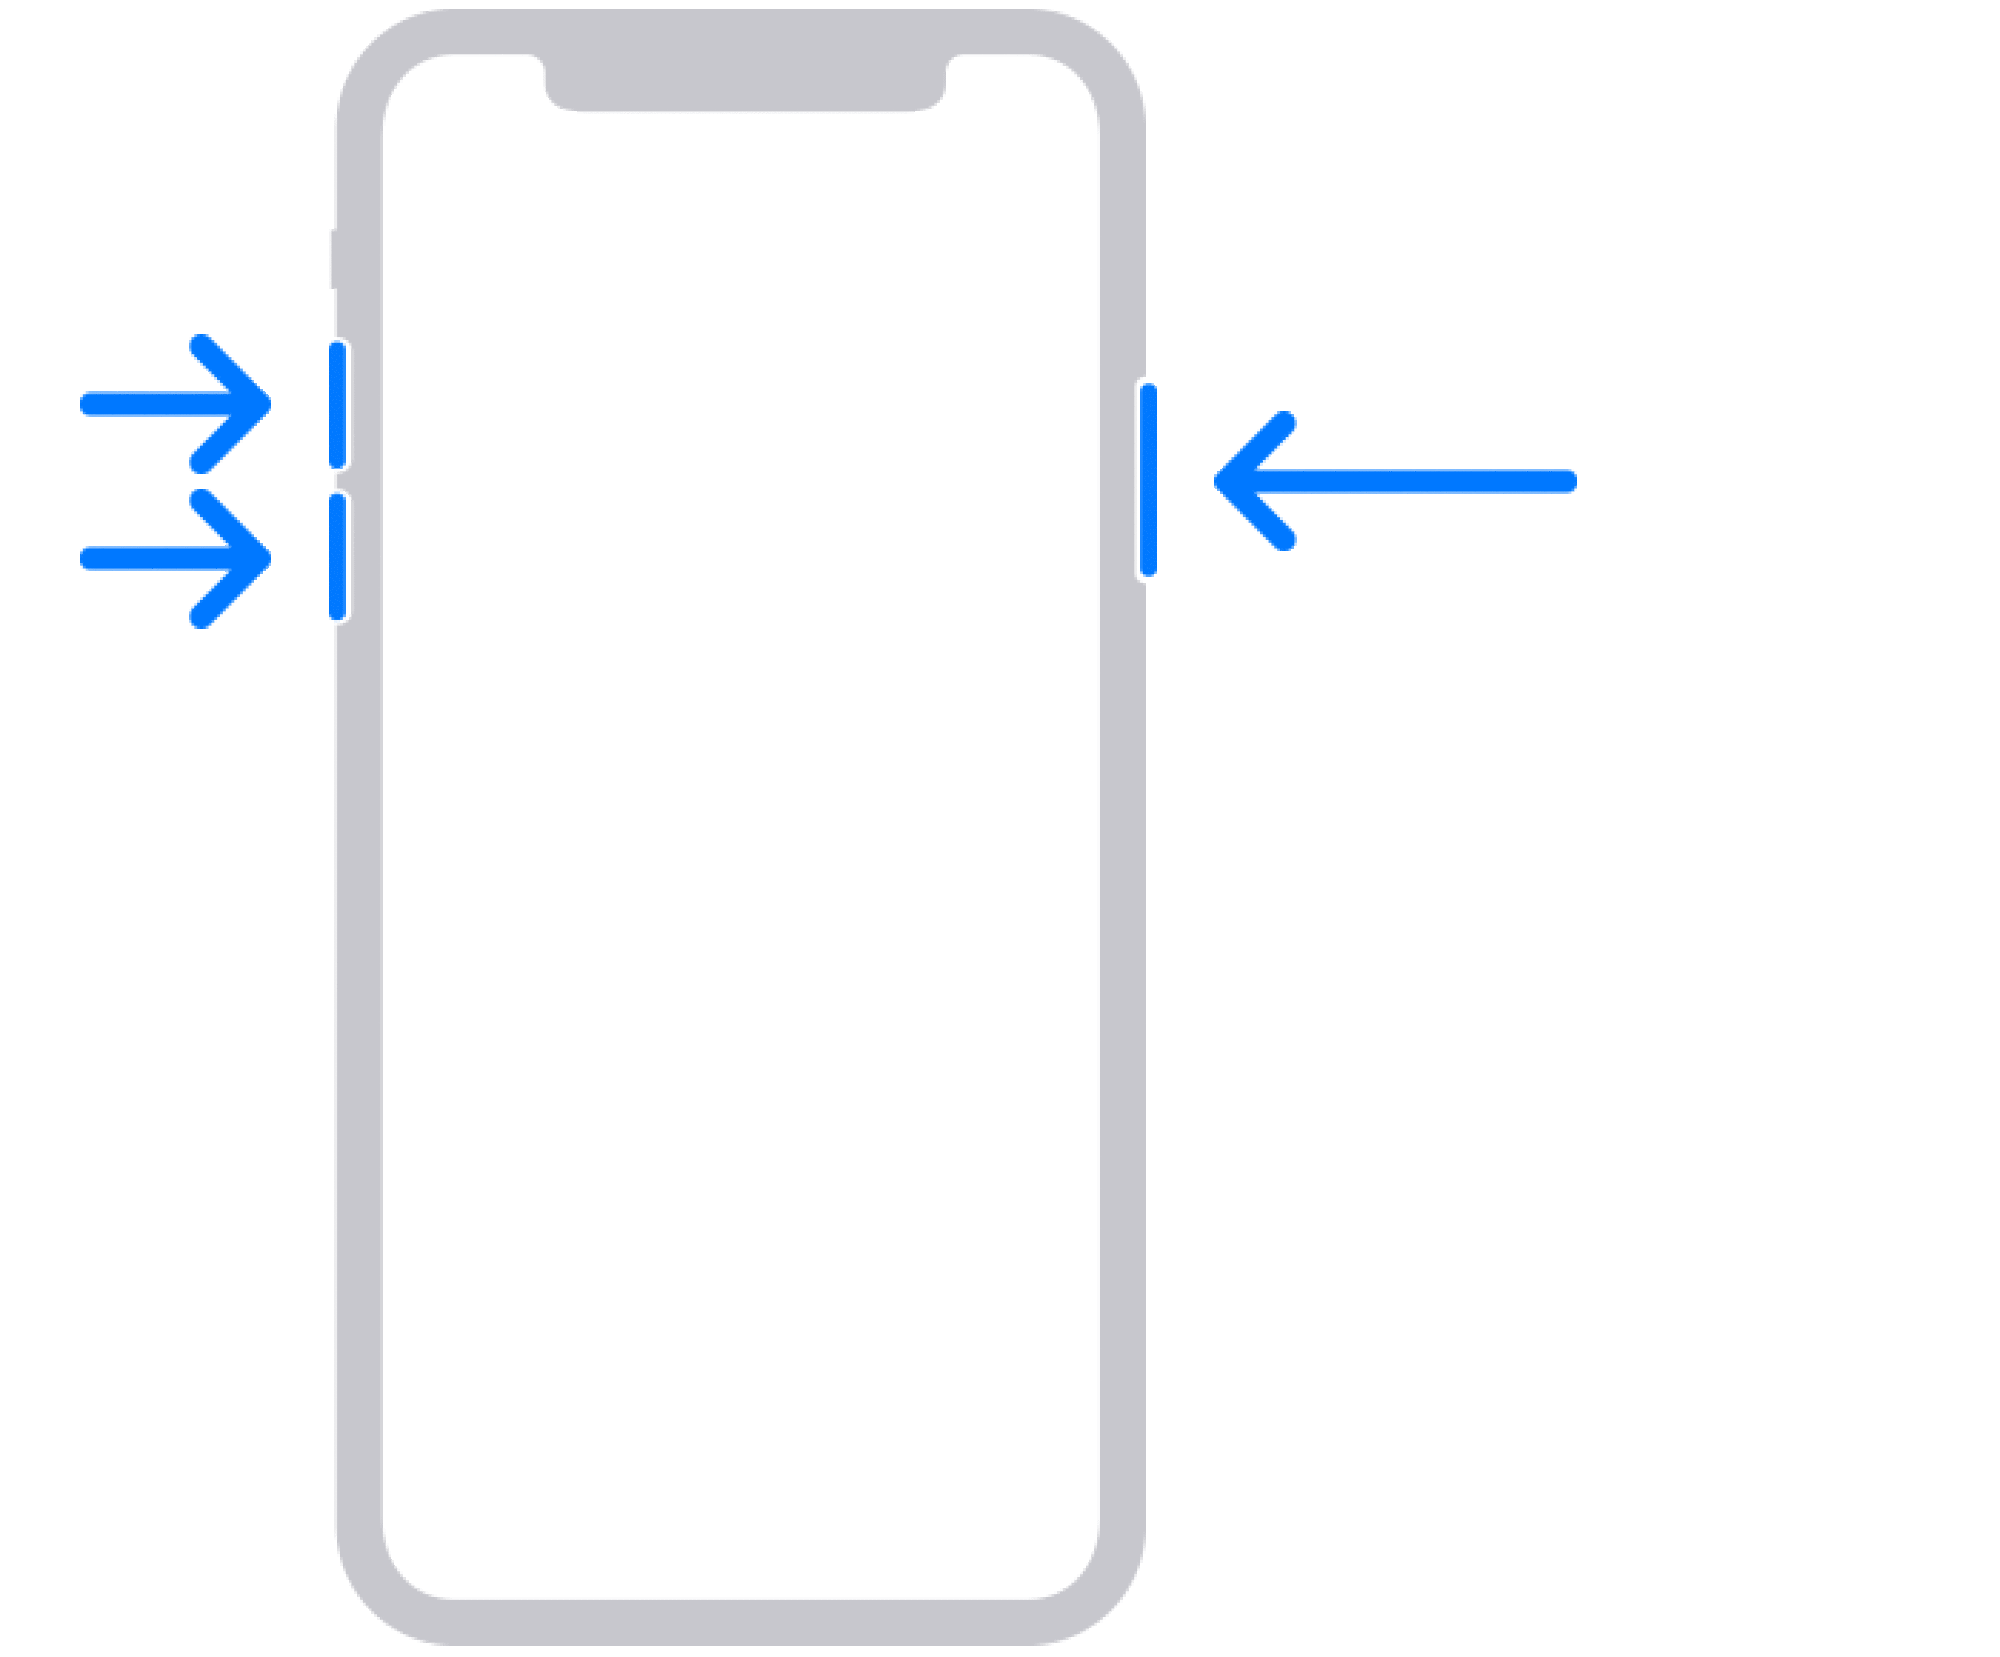 An image of an iPhone with blue arrows indicating which buttons to press in which order.